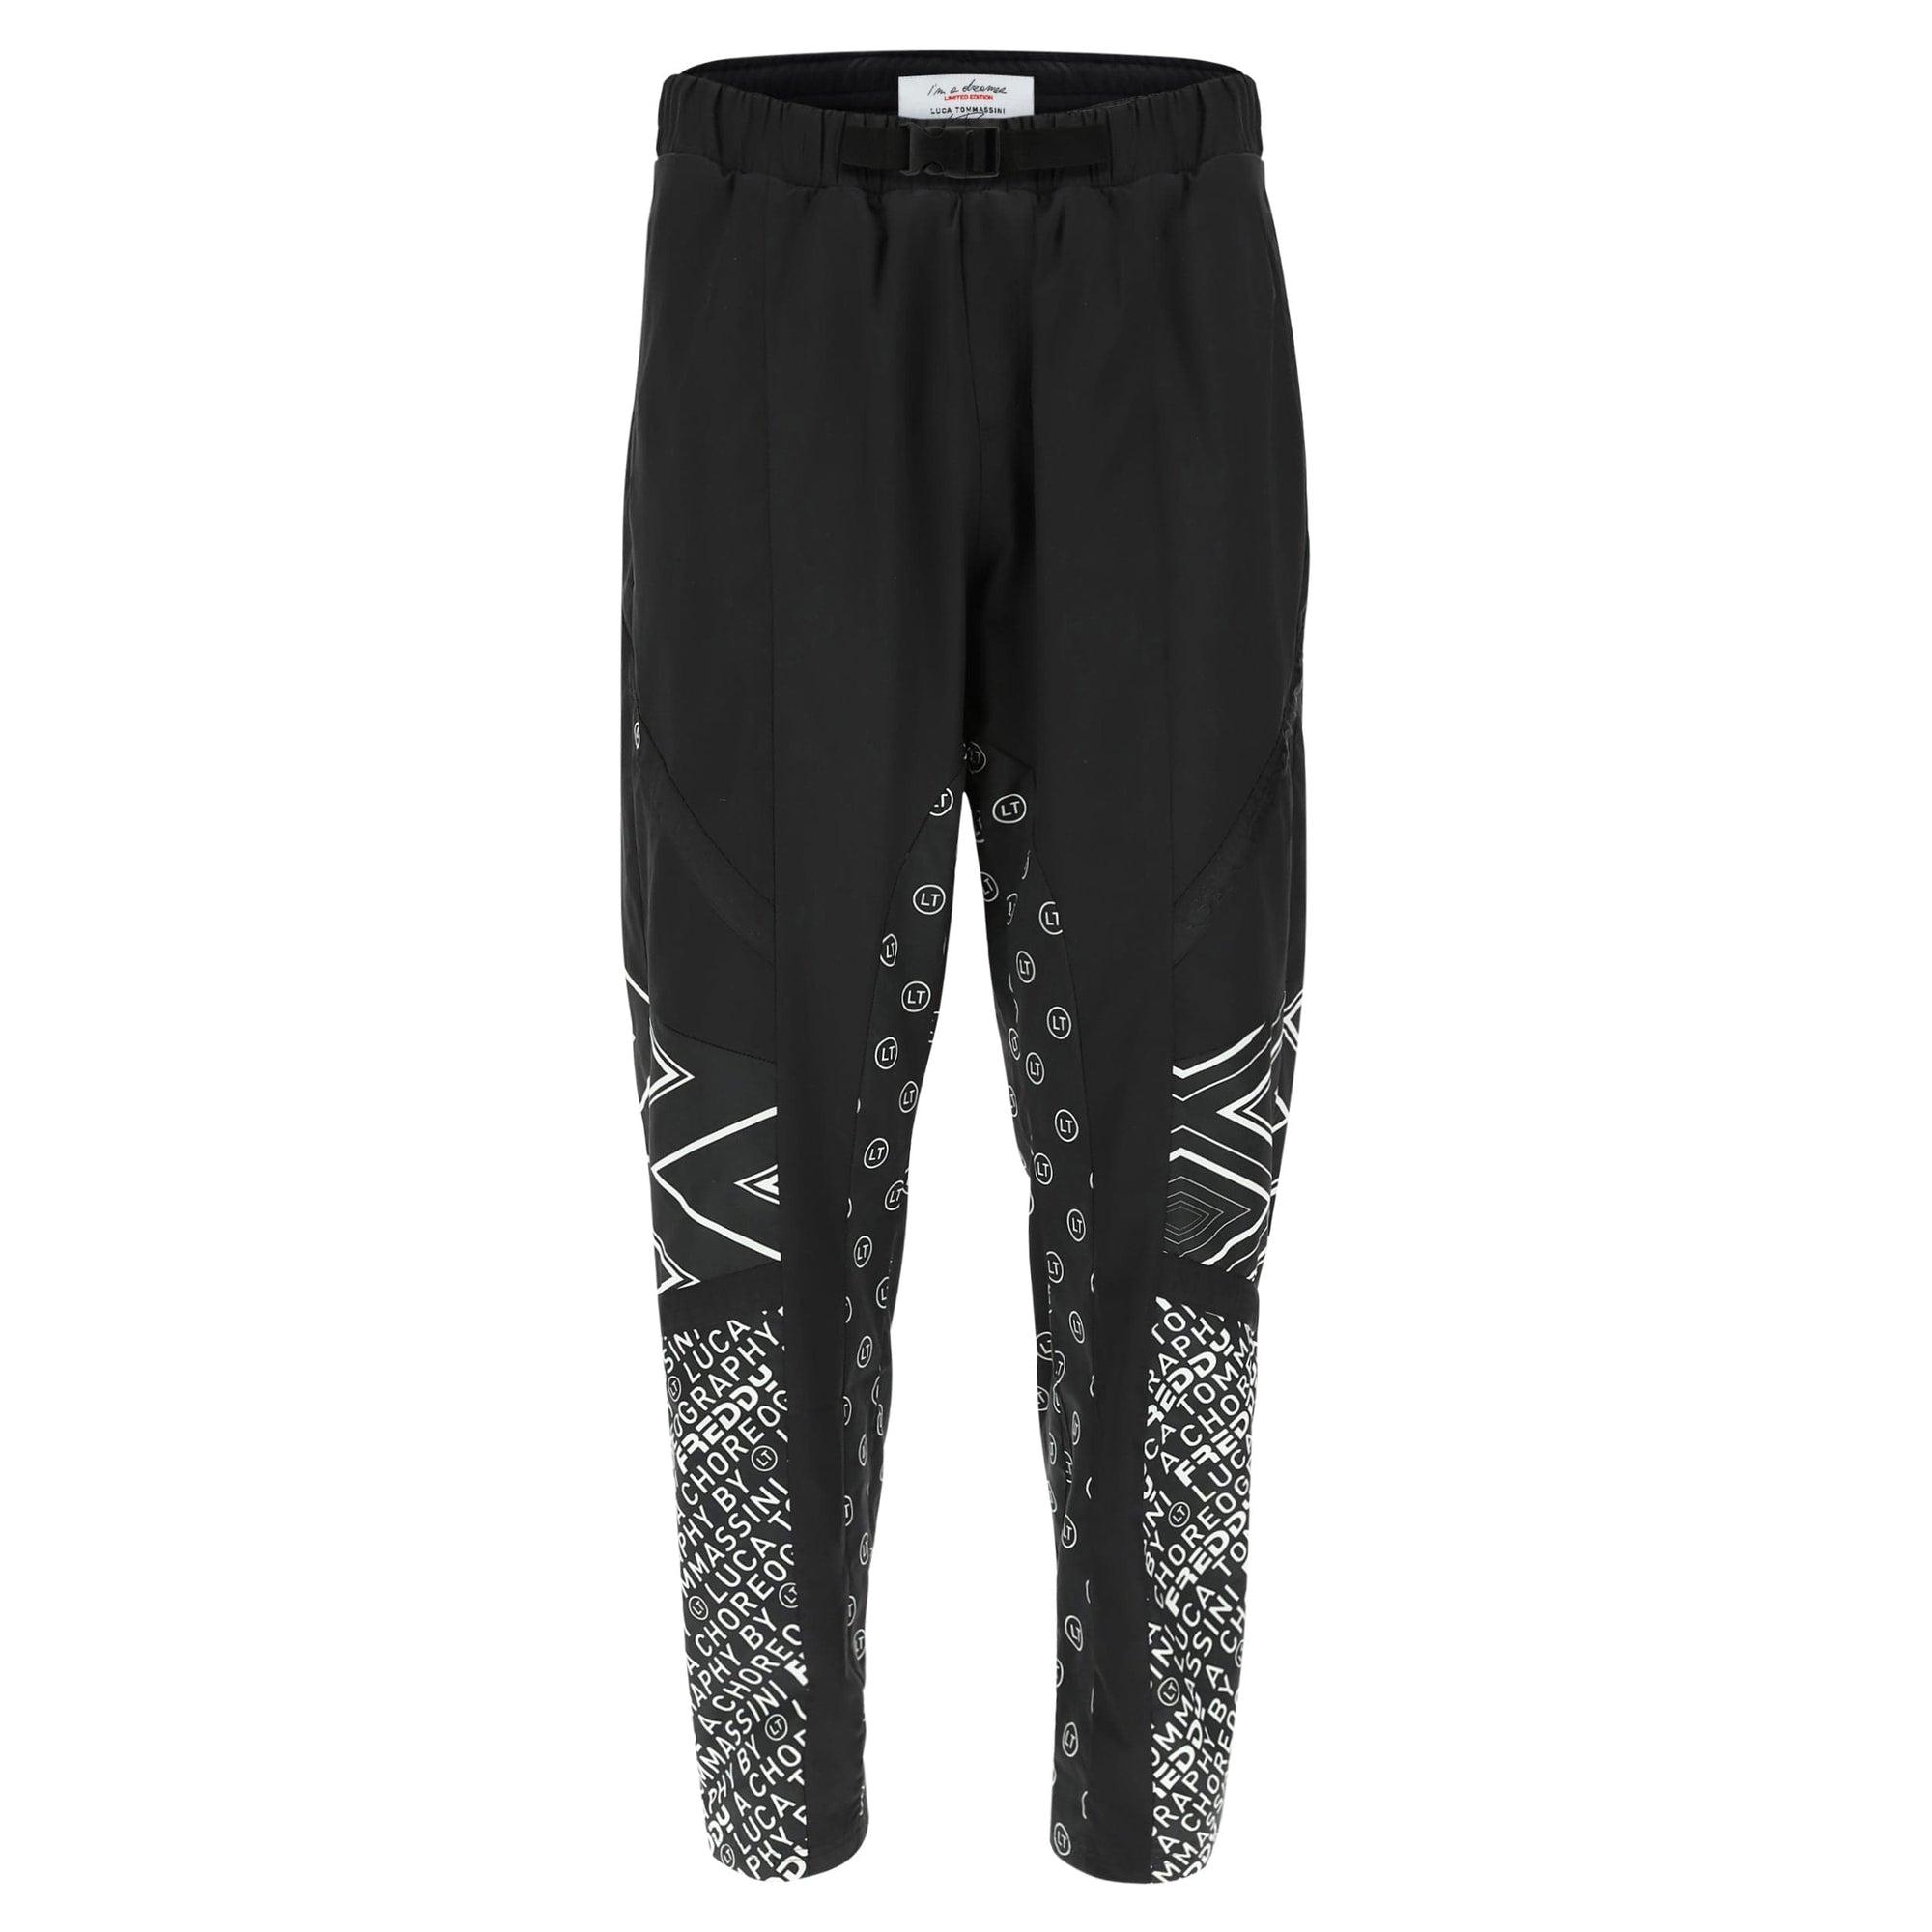 Trousers unisex with pattern print - A Choreography by Luca Tommassini - Black 1